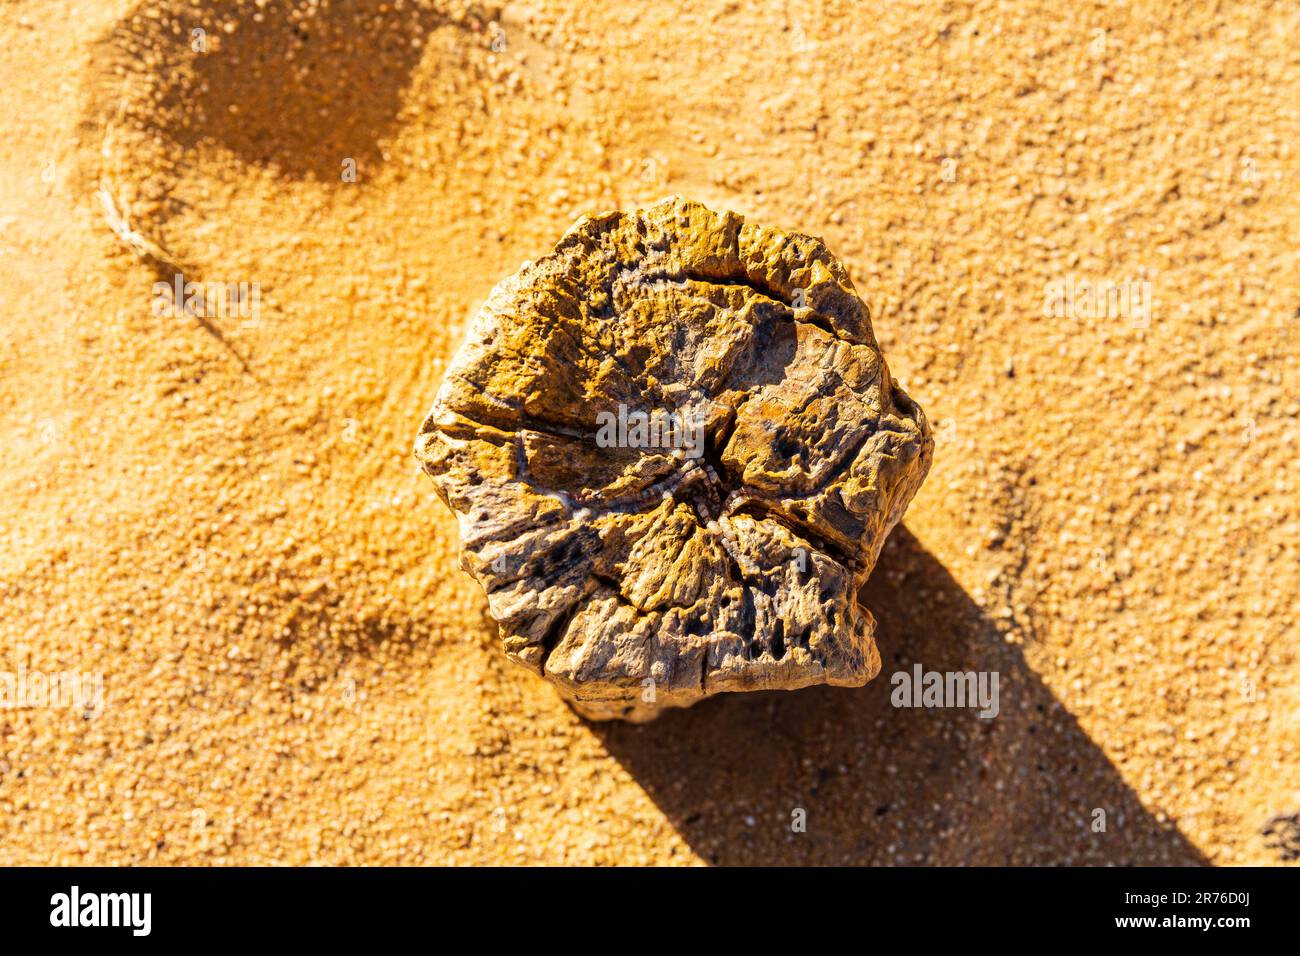 cross sectional view from above of a section of fossilized tree trunk standing in the desert near karima, sudan Stock Photo